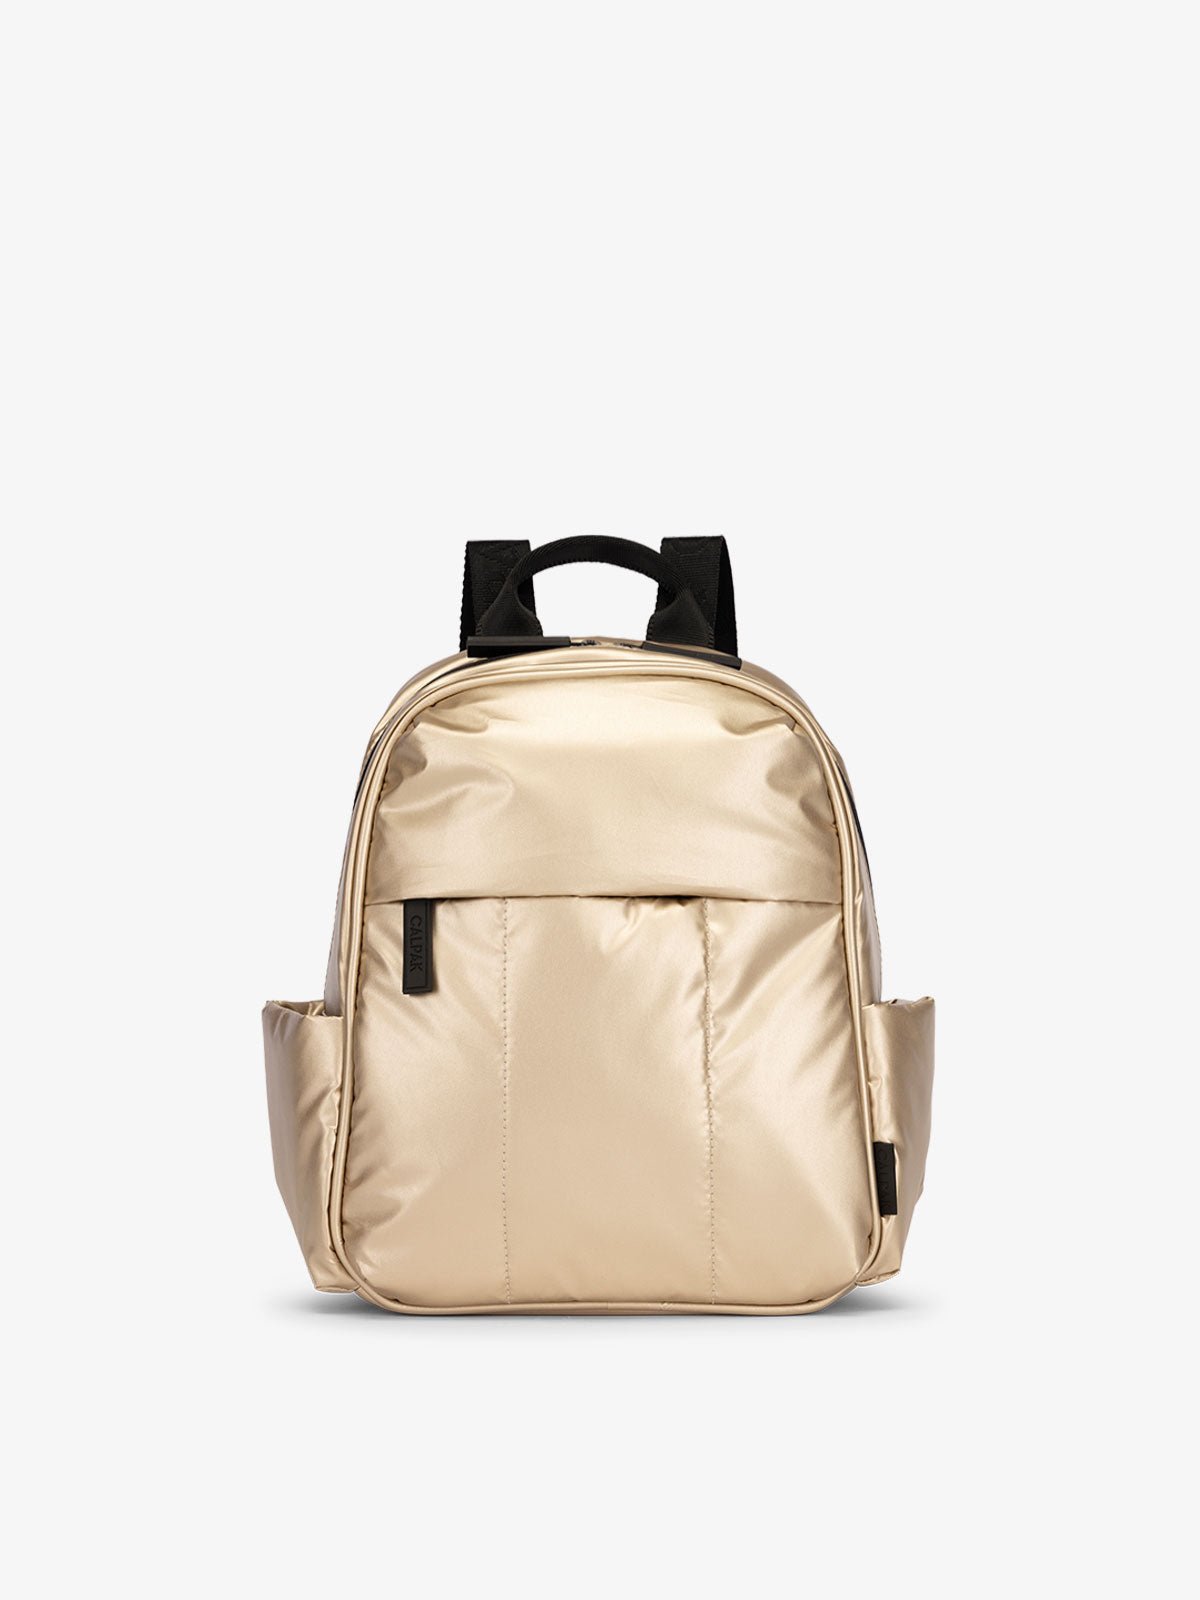 CALPAK Luka Mini Backpack with soft puffy exterior and front zippered pocket in metallic gold